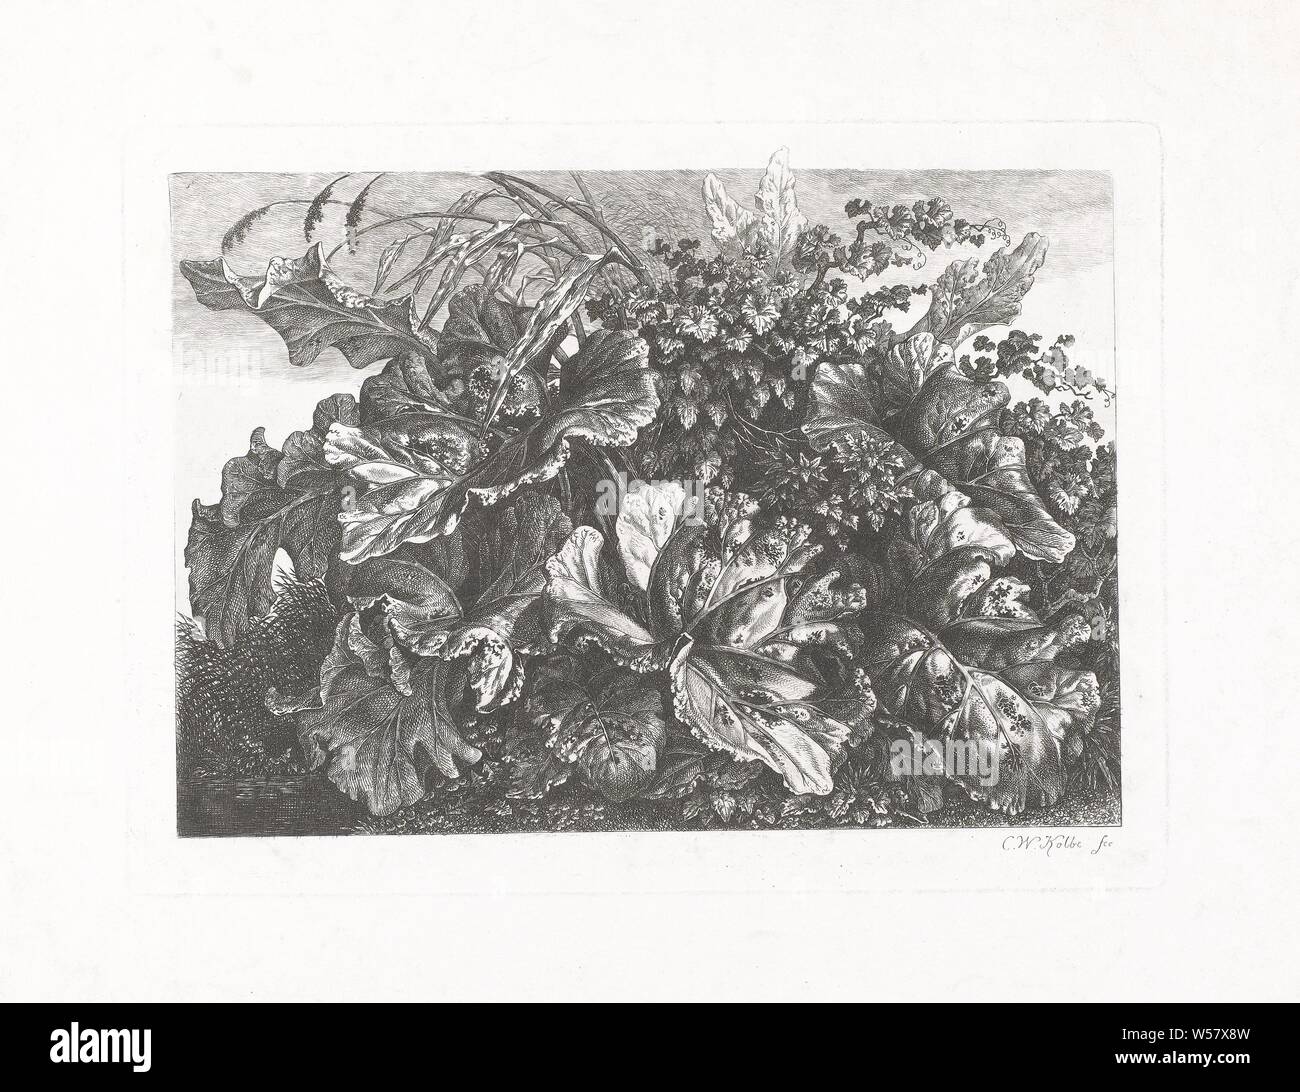 Plants and leaves, Possibly a study of the plants, including the large burdock, known under the Latin name 'Arctium lappa', lower plants, Carl Wilhelm Kolbe (I) (mentioned on object), 1767 - 1835, paper, etching, h 203 mm × w 274 mm Stock Photo